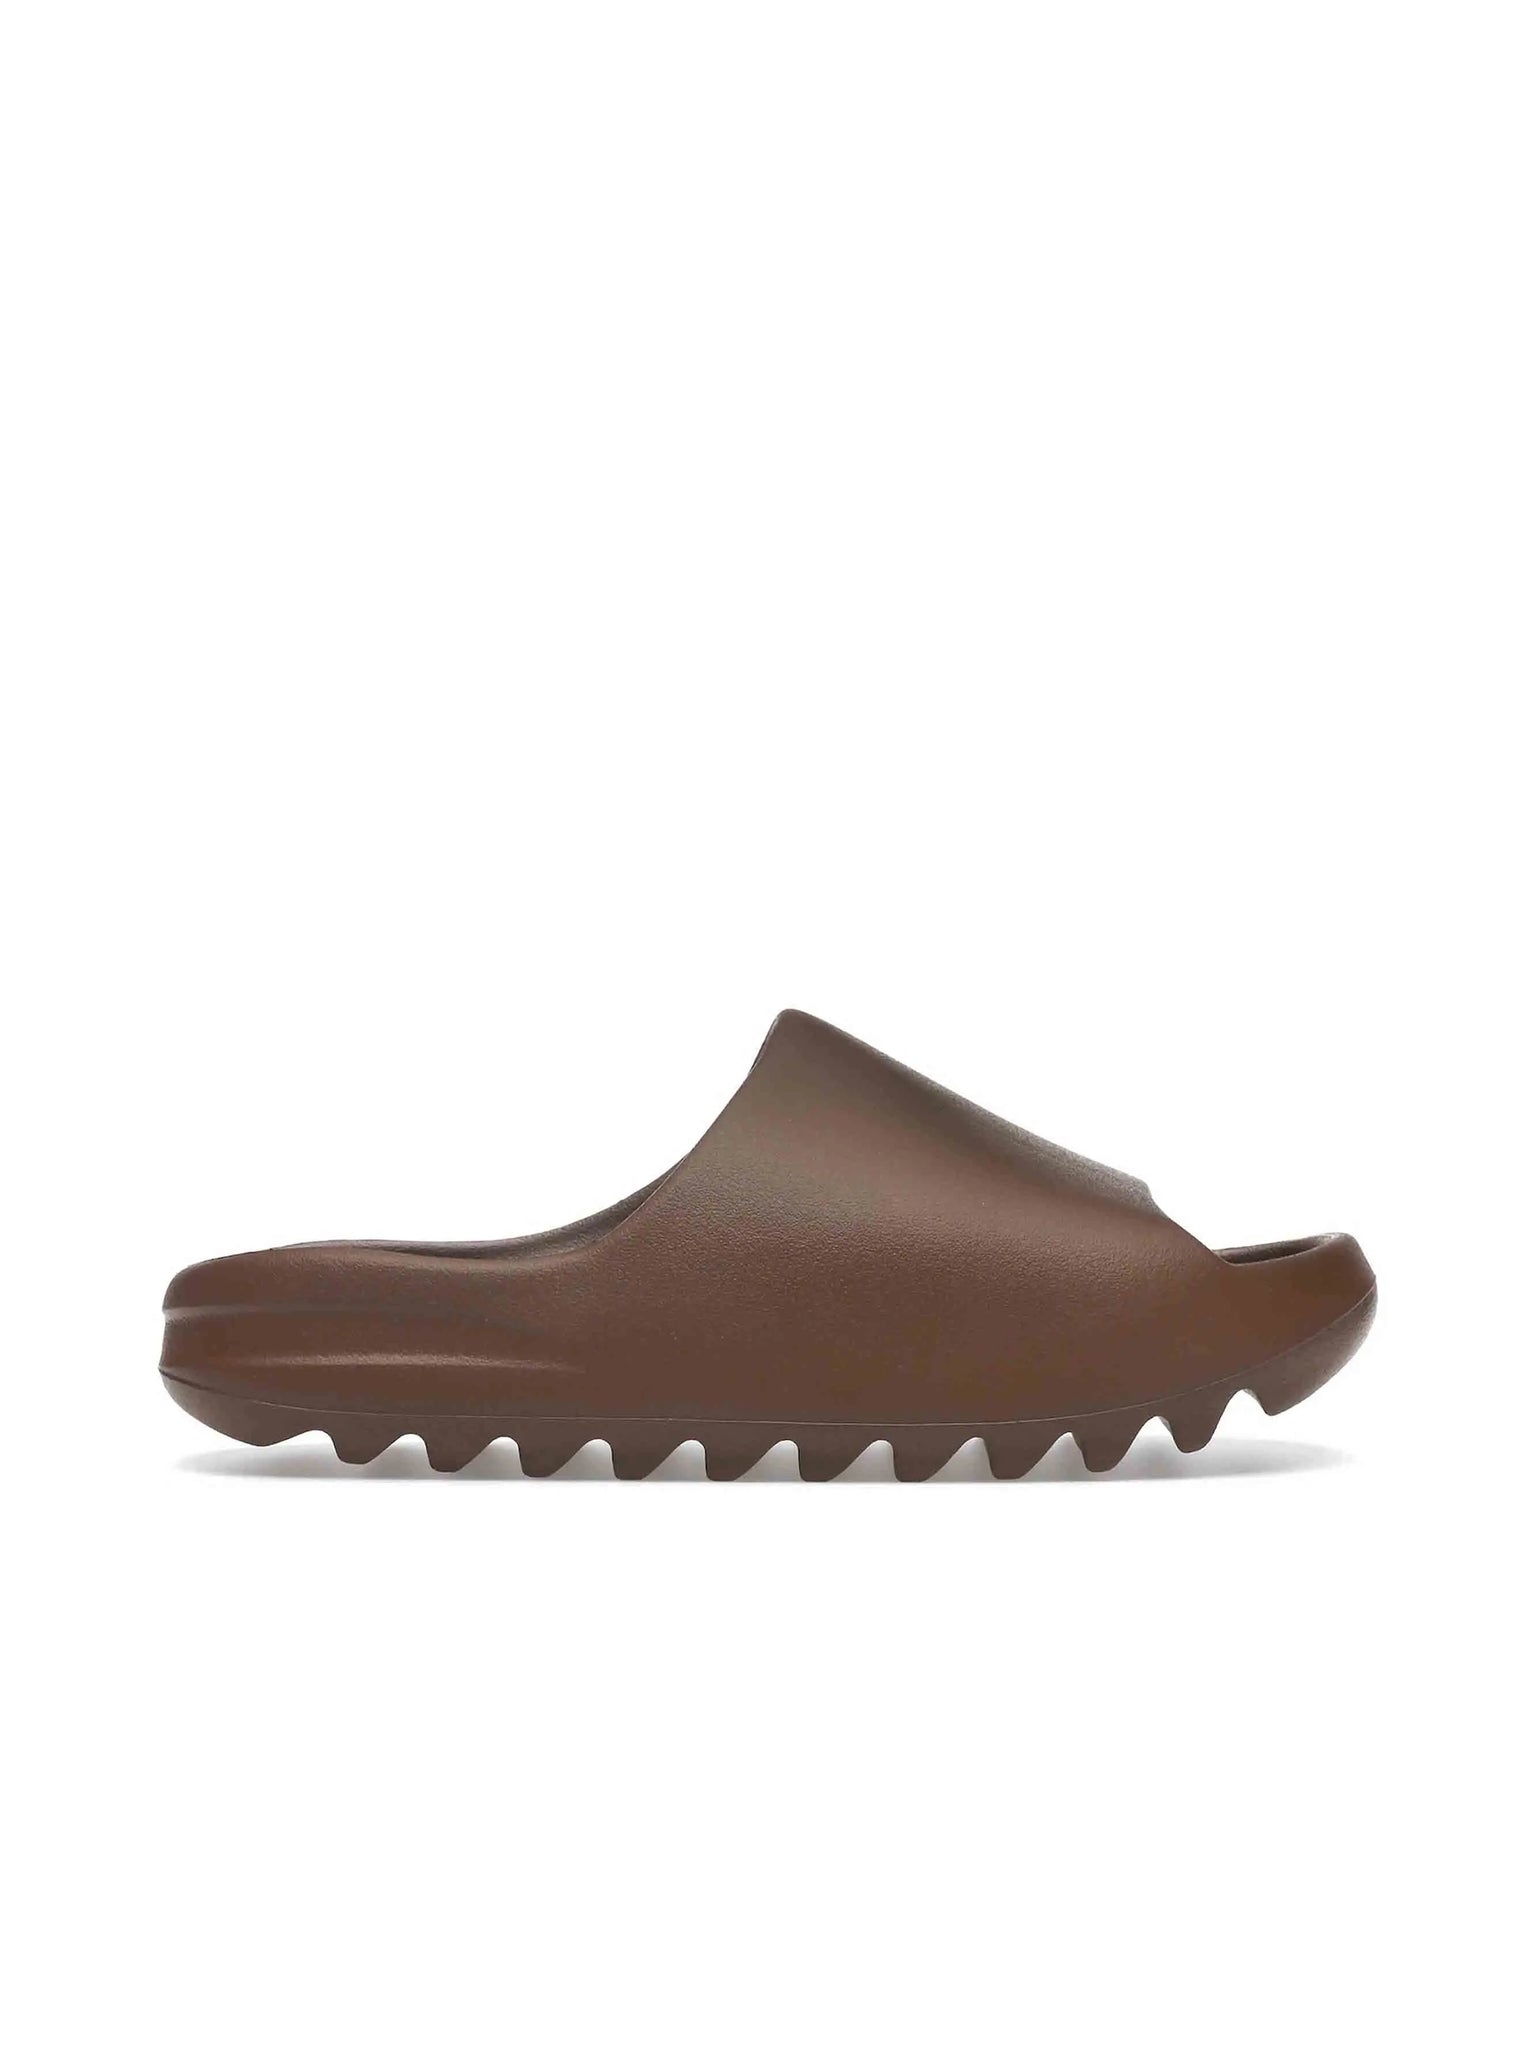 adidas Yeezy Slide Flax in Auckland, New Zealand - Shop name